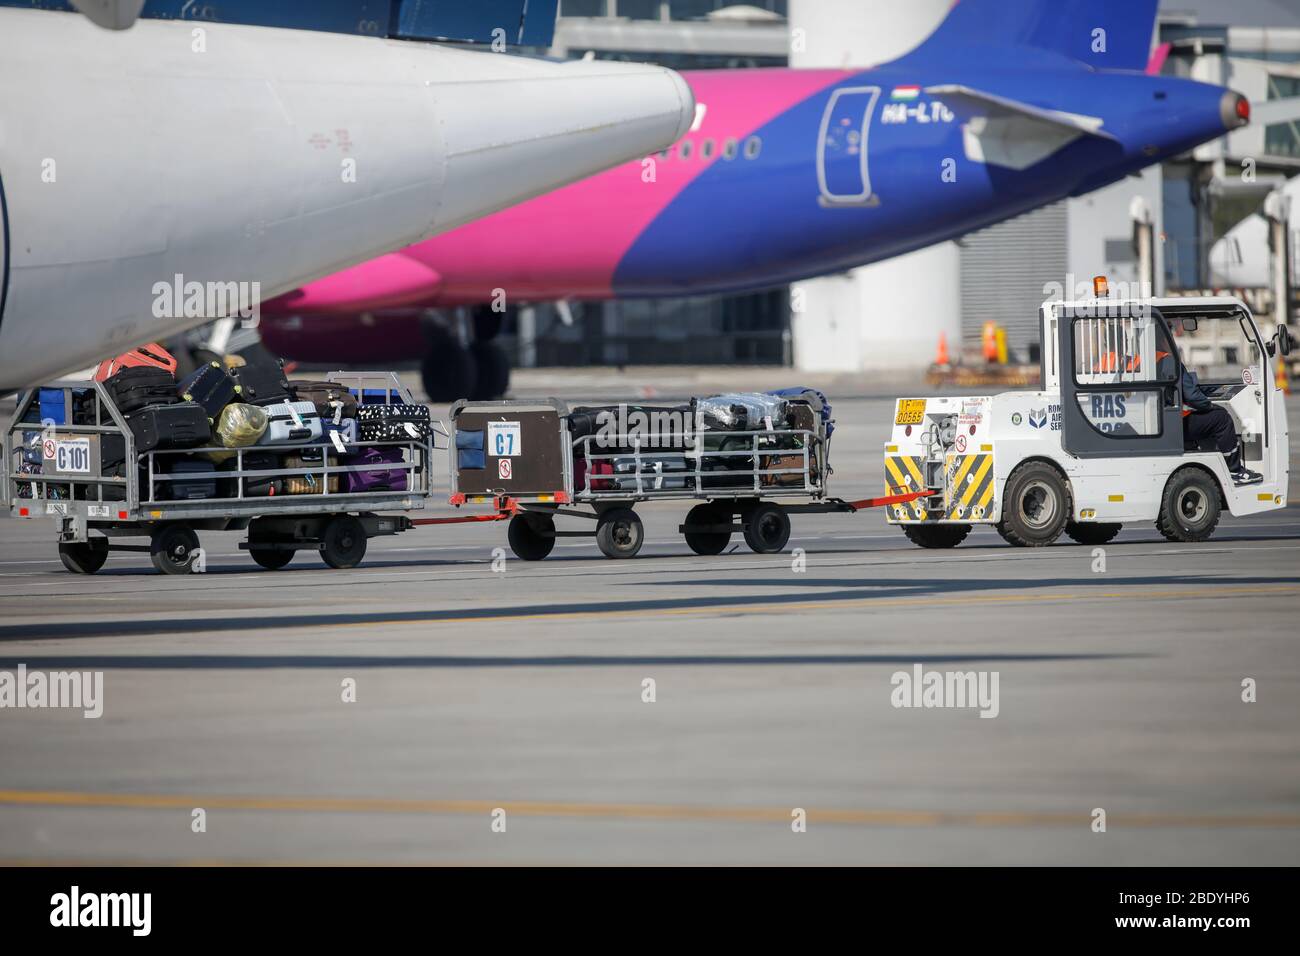 Otopeni, Romania - April 9, 2020: Luggages on baggage carrier on the Henri Coanda International Airport taxiway. Stock Photo